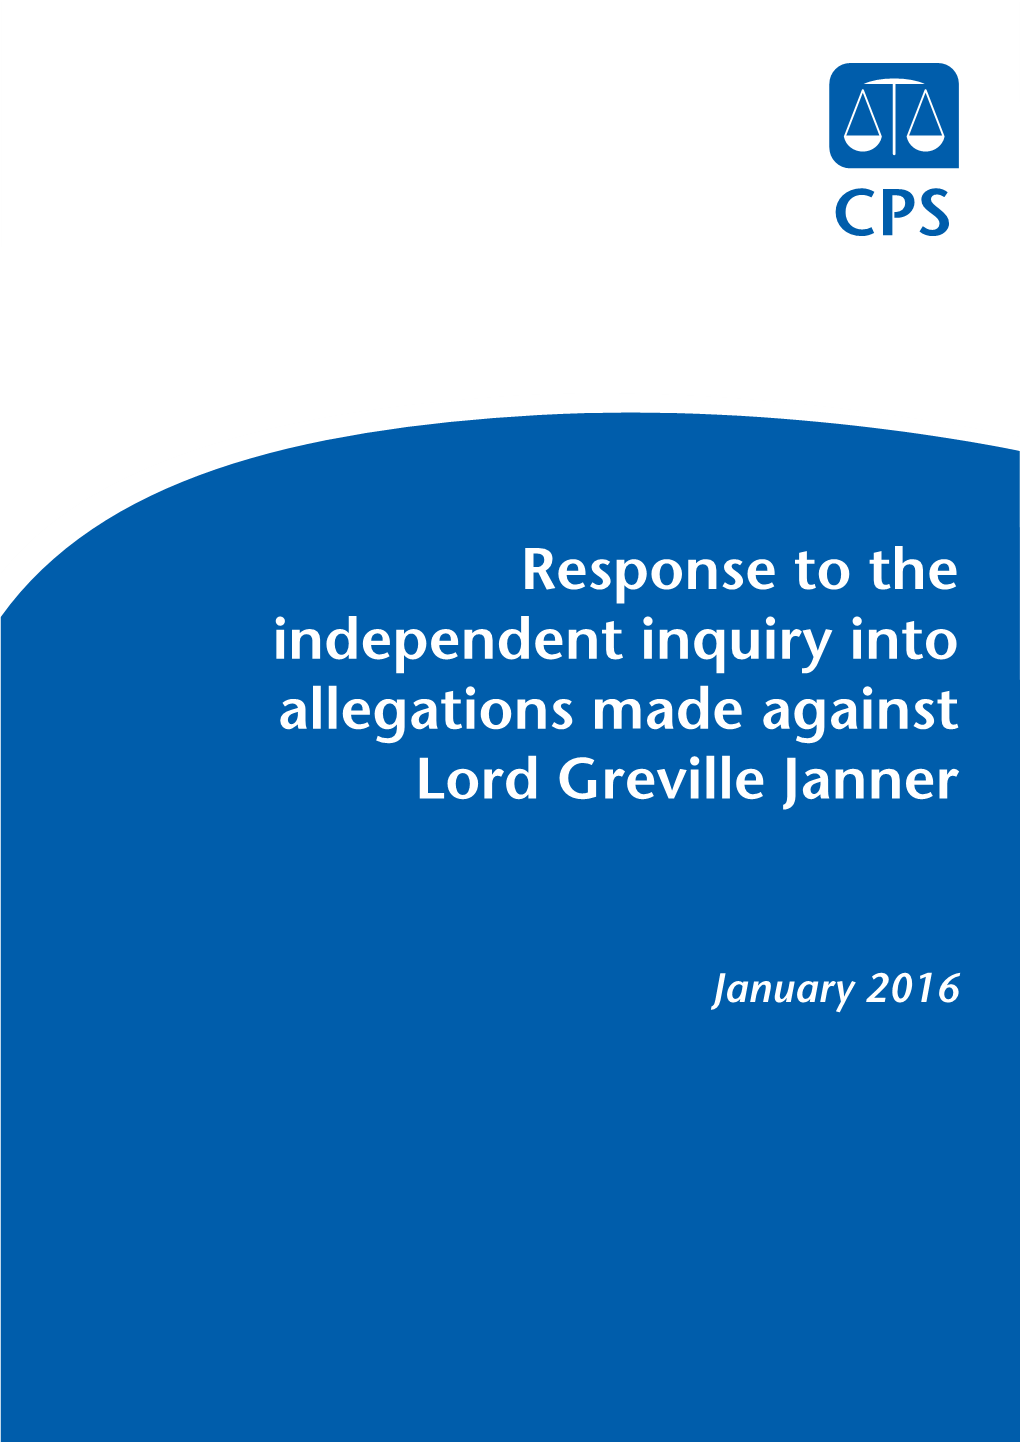 Response to the Independent Inquiry Into Allegations Made Against Lord Greville Janner